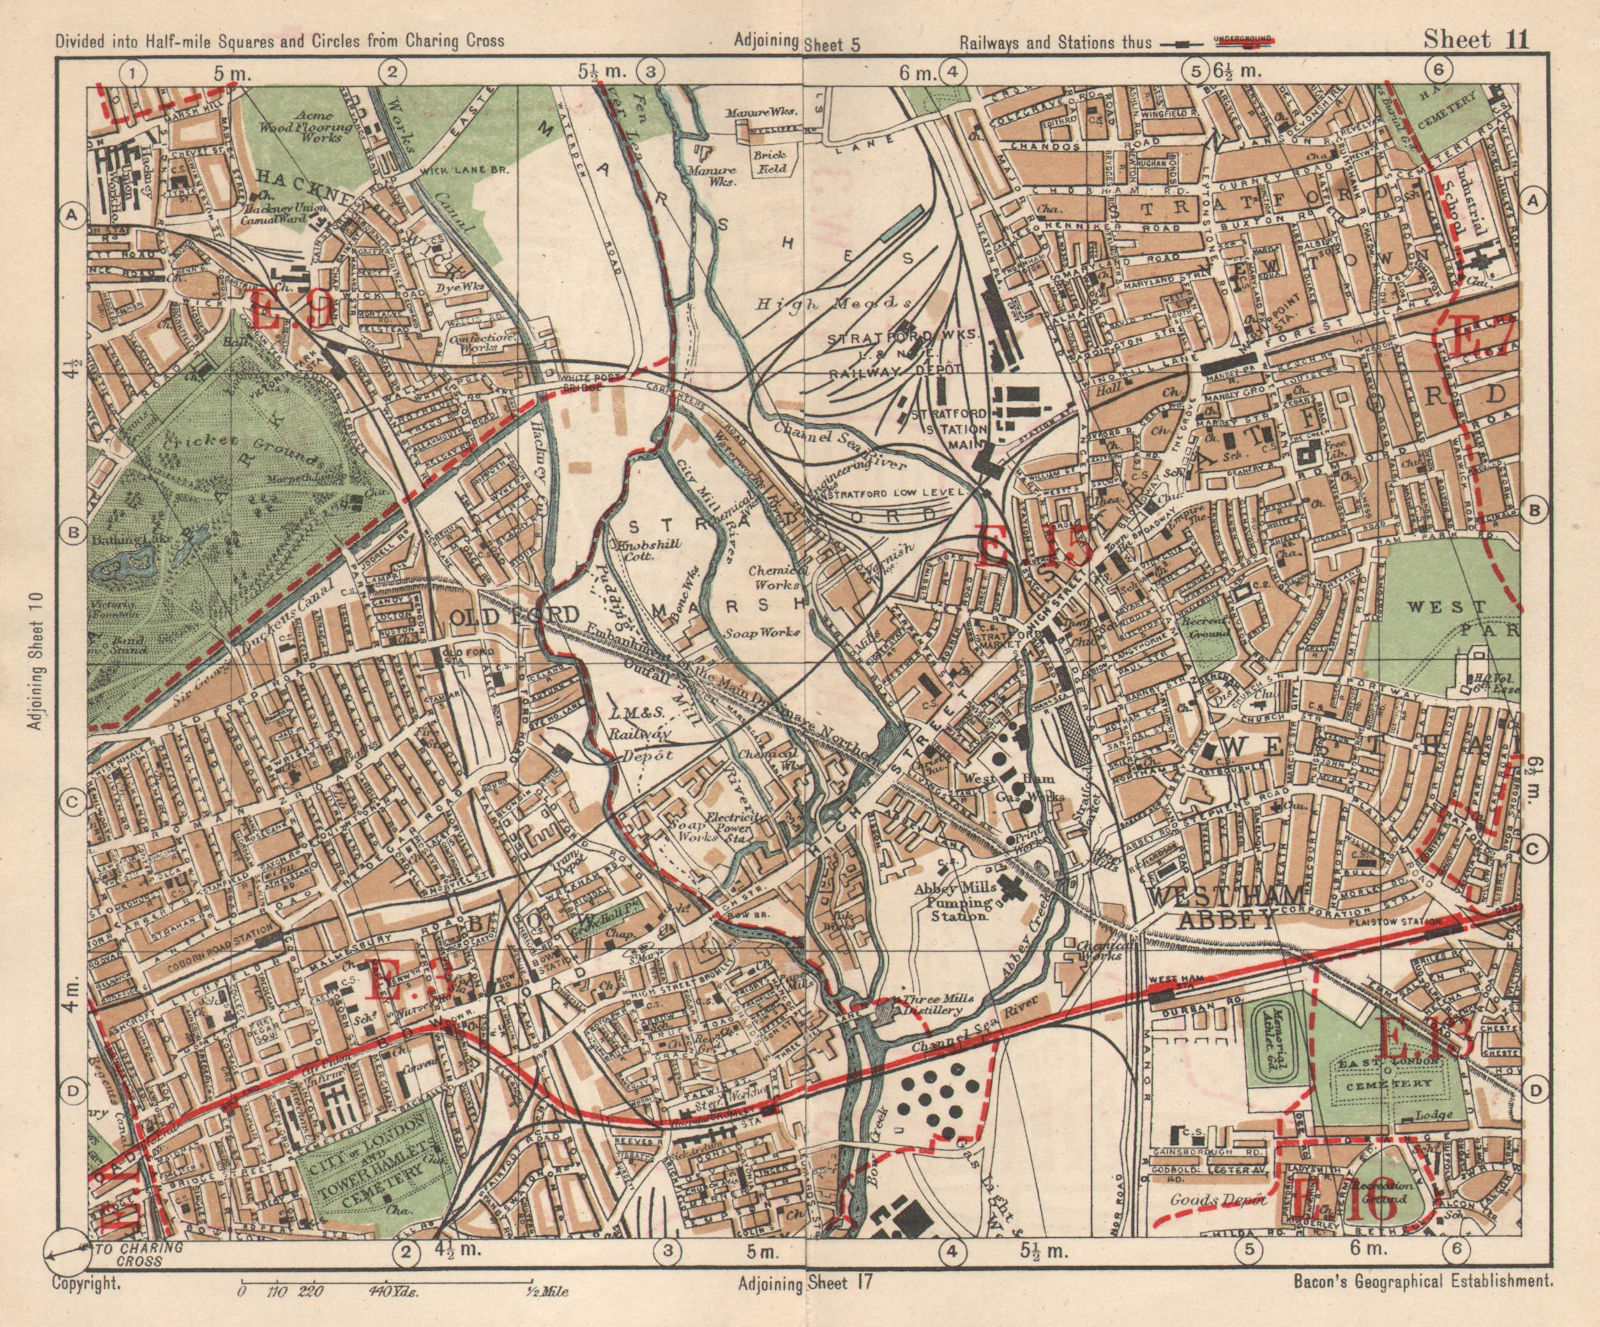 NE LONDON. Stratford Bow Hackney Wick West Ham Old Ford Plaistow.BACON 1925 map